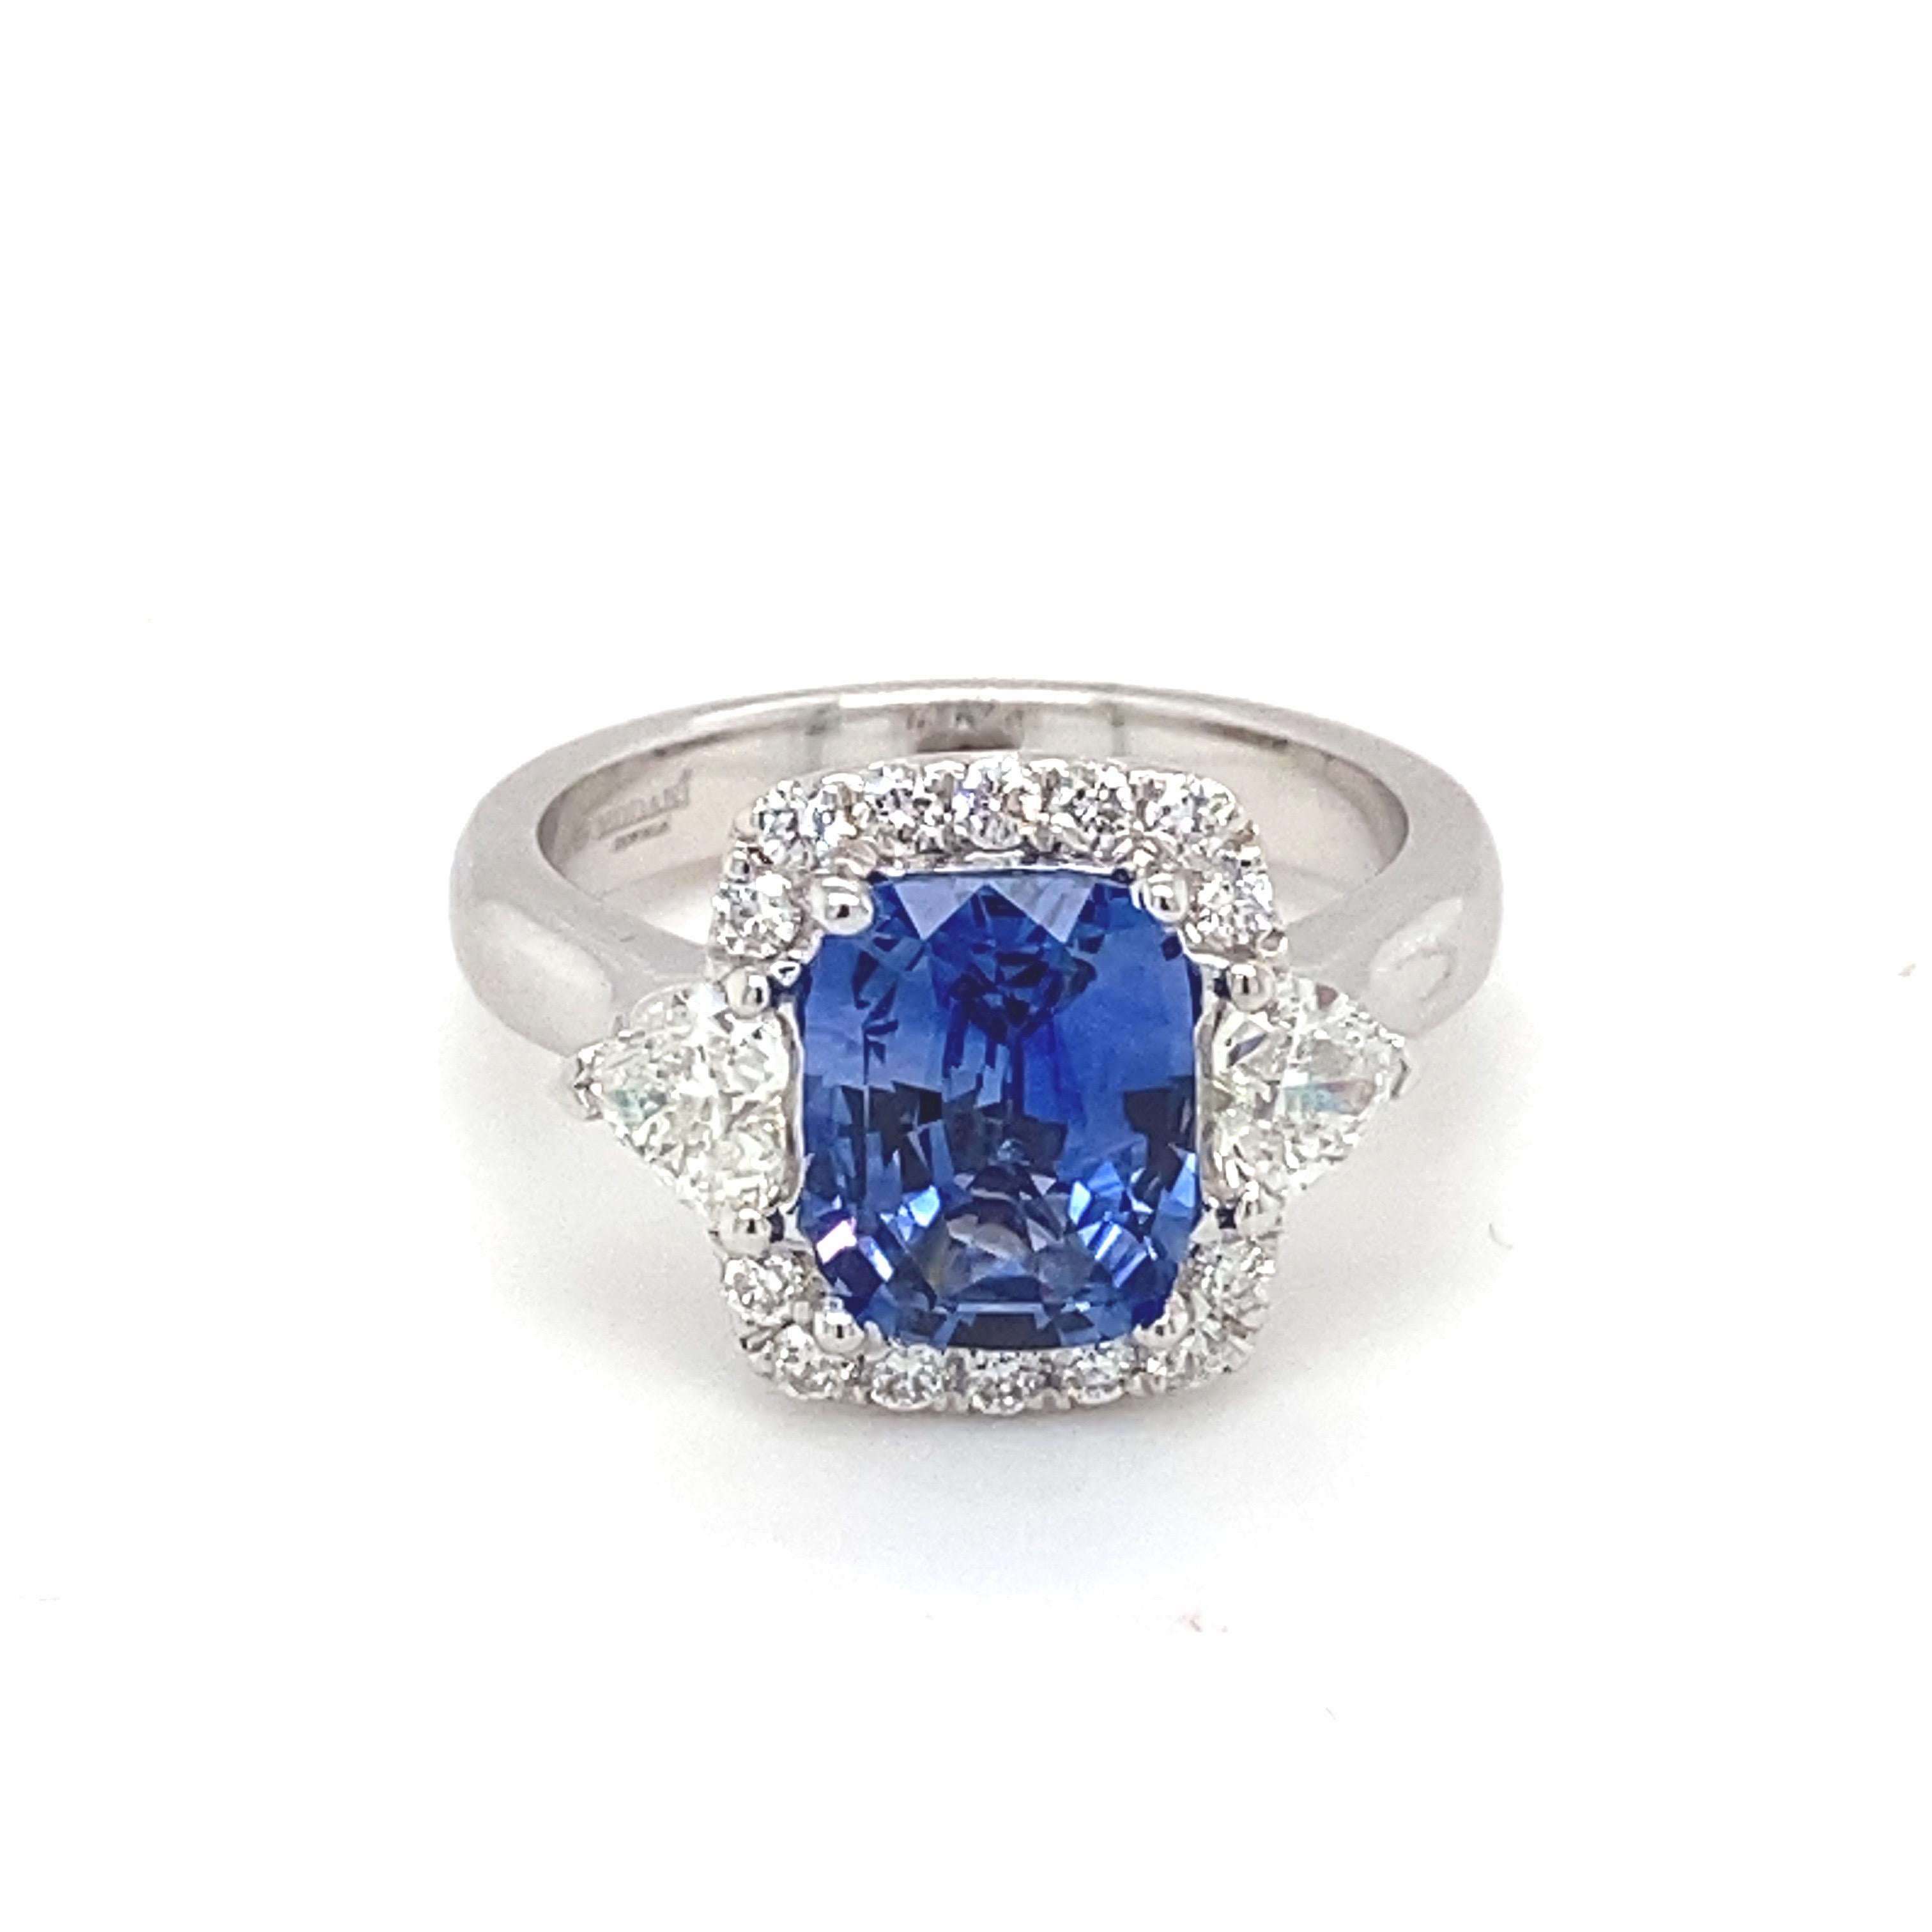 This GIA Certified 2.76 carat blue sapphire cushion shape center stone is surrounded by a glittery halo of white diamond. It also has two trillion shape white diamond as side stone. This exceedingly elegant ring mounted in white gold dazzles with